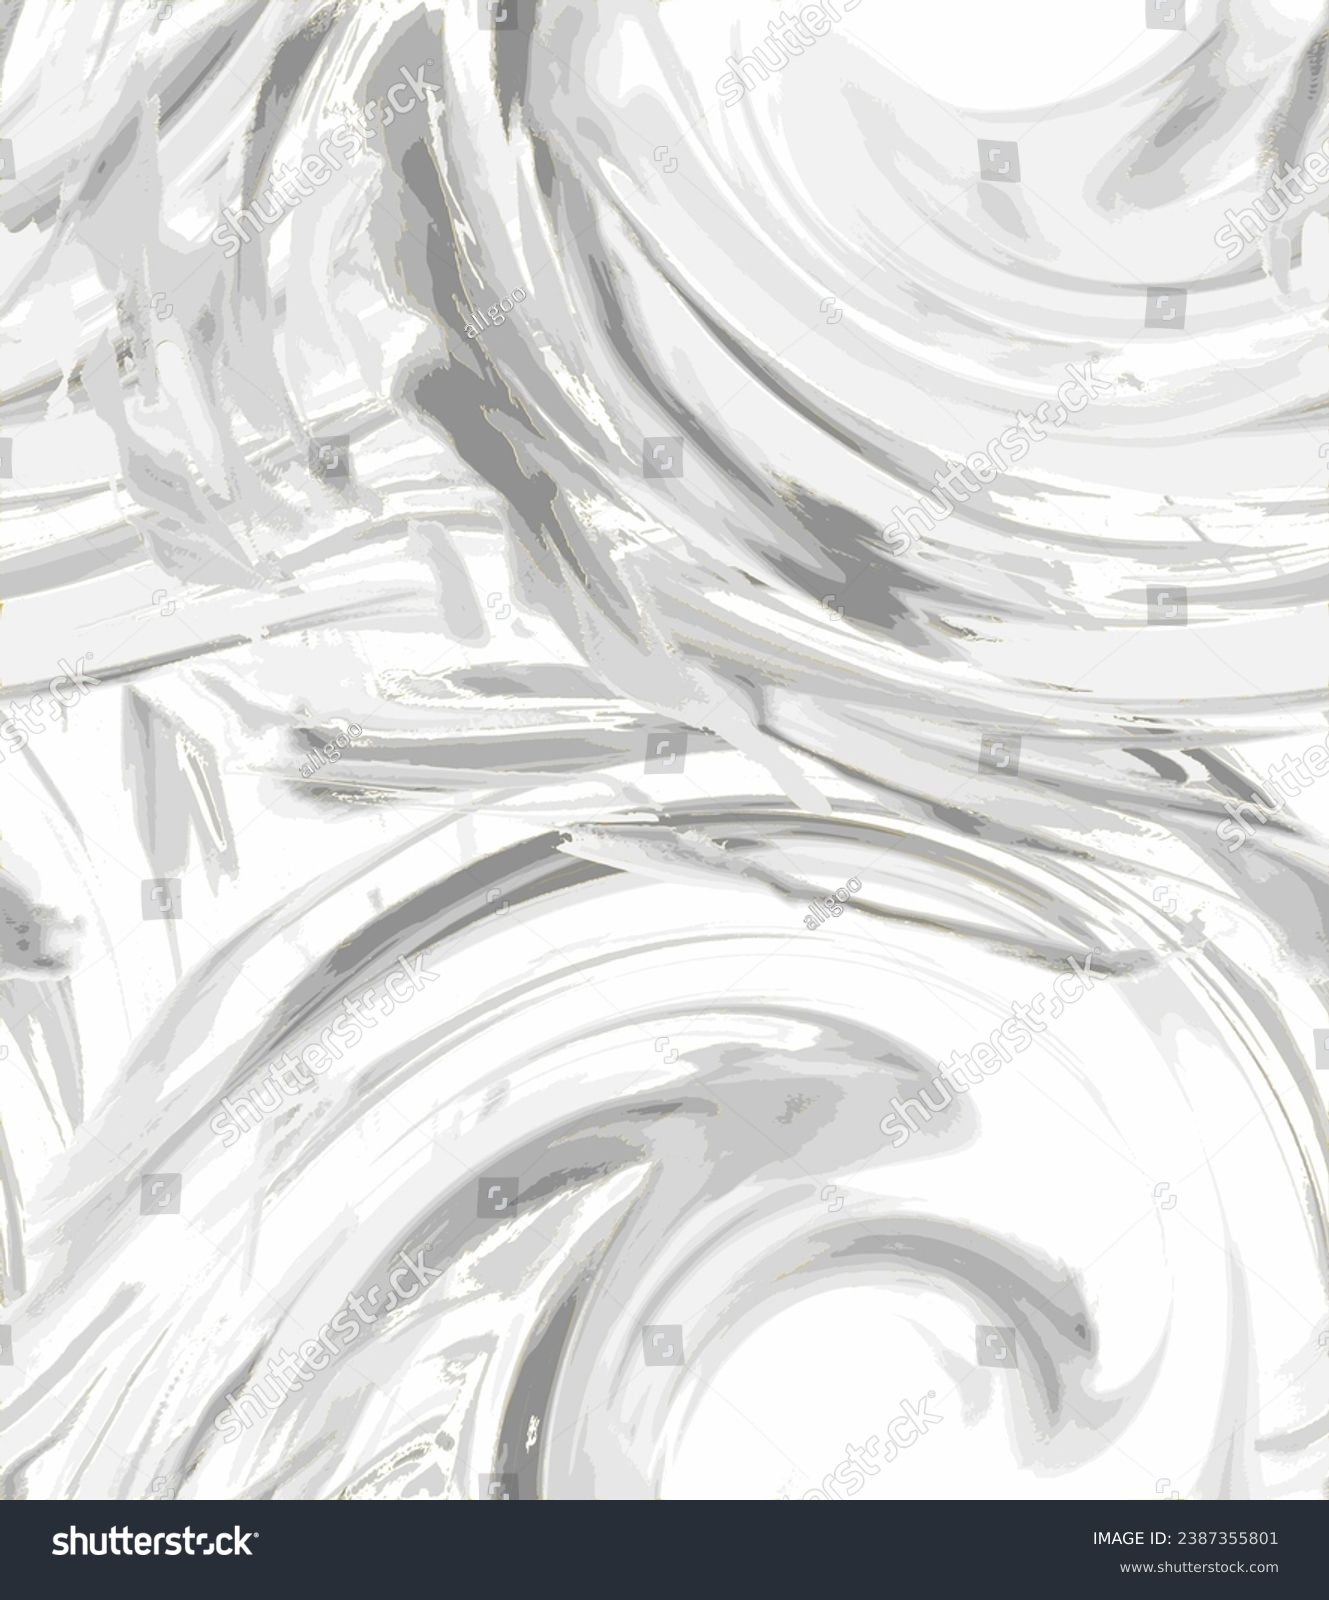 SVG of Seamless pattern of swirling strokes of acrylic white and gray paint with gilded veining. Vector svg